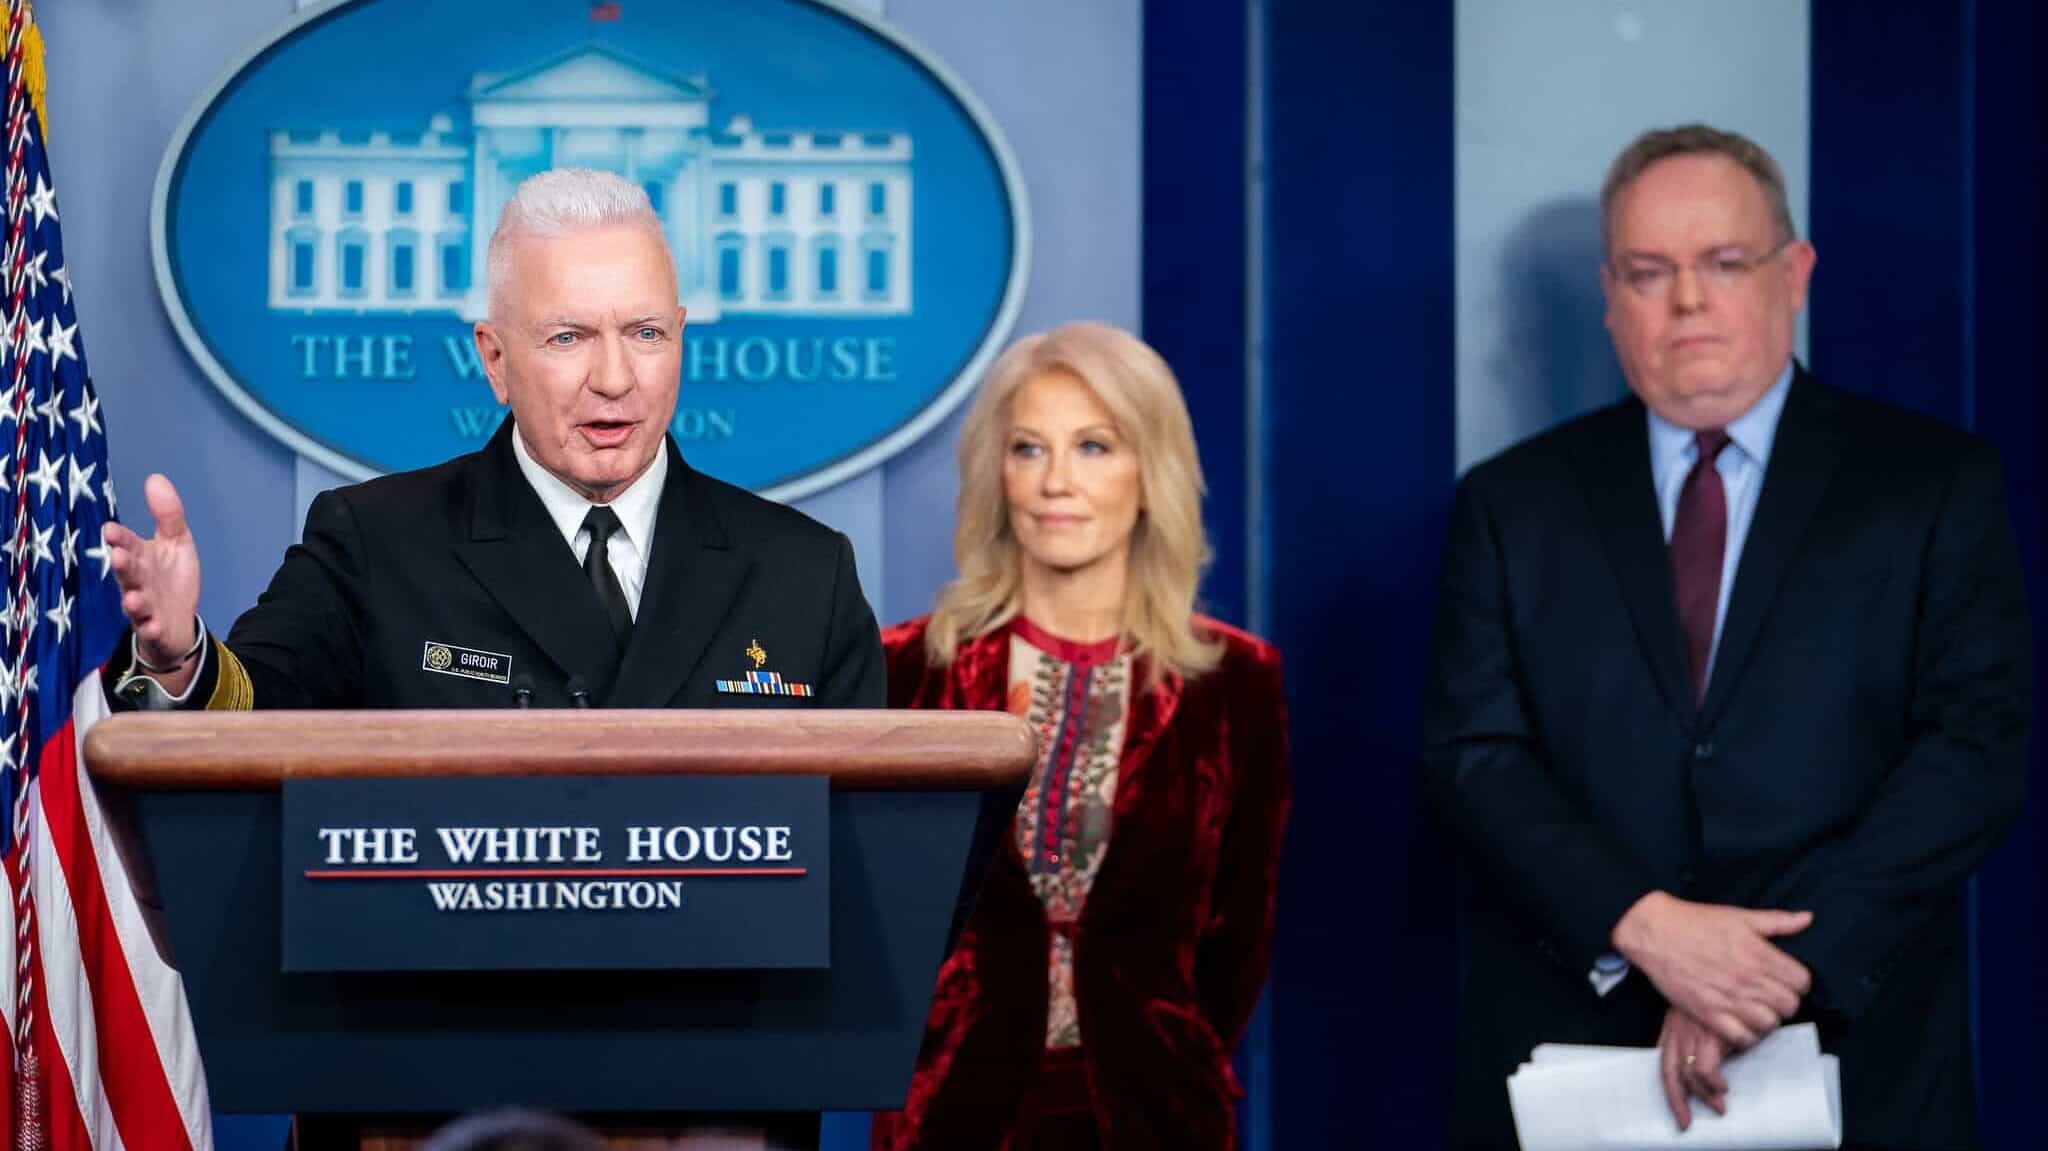 Assistant Secretary of Health Adm. Brett Giroir, joined by Counselor to the President Kellyanne Conway and Office of National Drug Control Policy Director Jim Carroll, addresses reporters at a press briefing Thursday, Jan. 30, 2020, in the James S. Brady Press Briefing Room of the White House. (Official White House Photo by Tia Dufour)